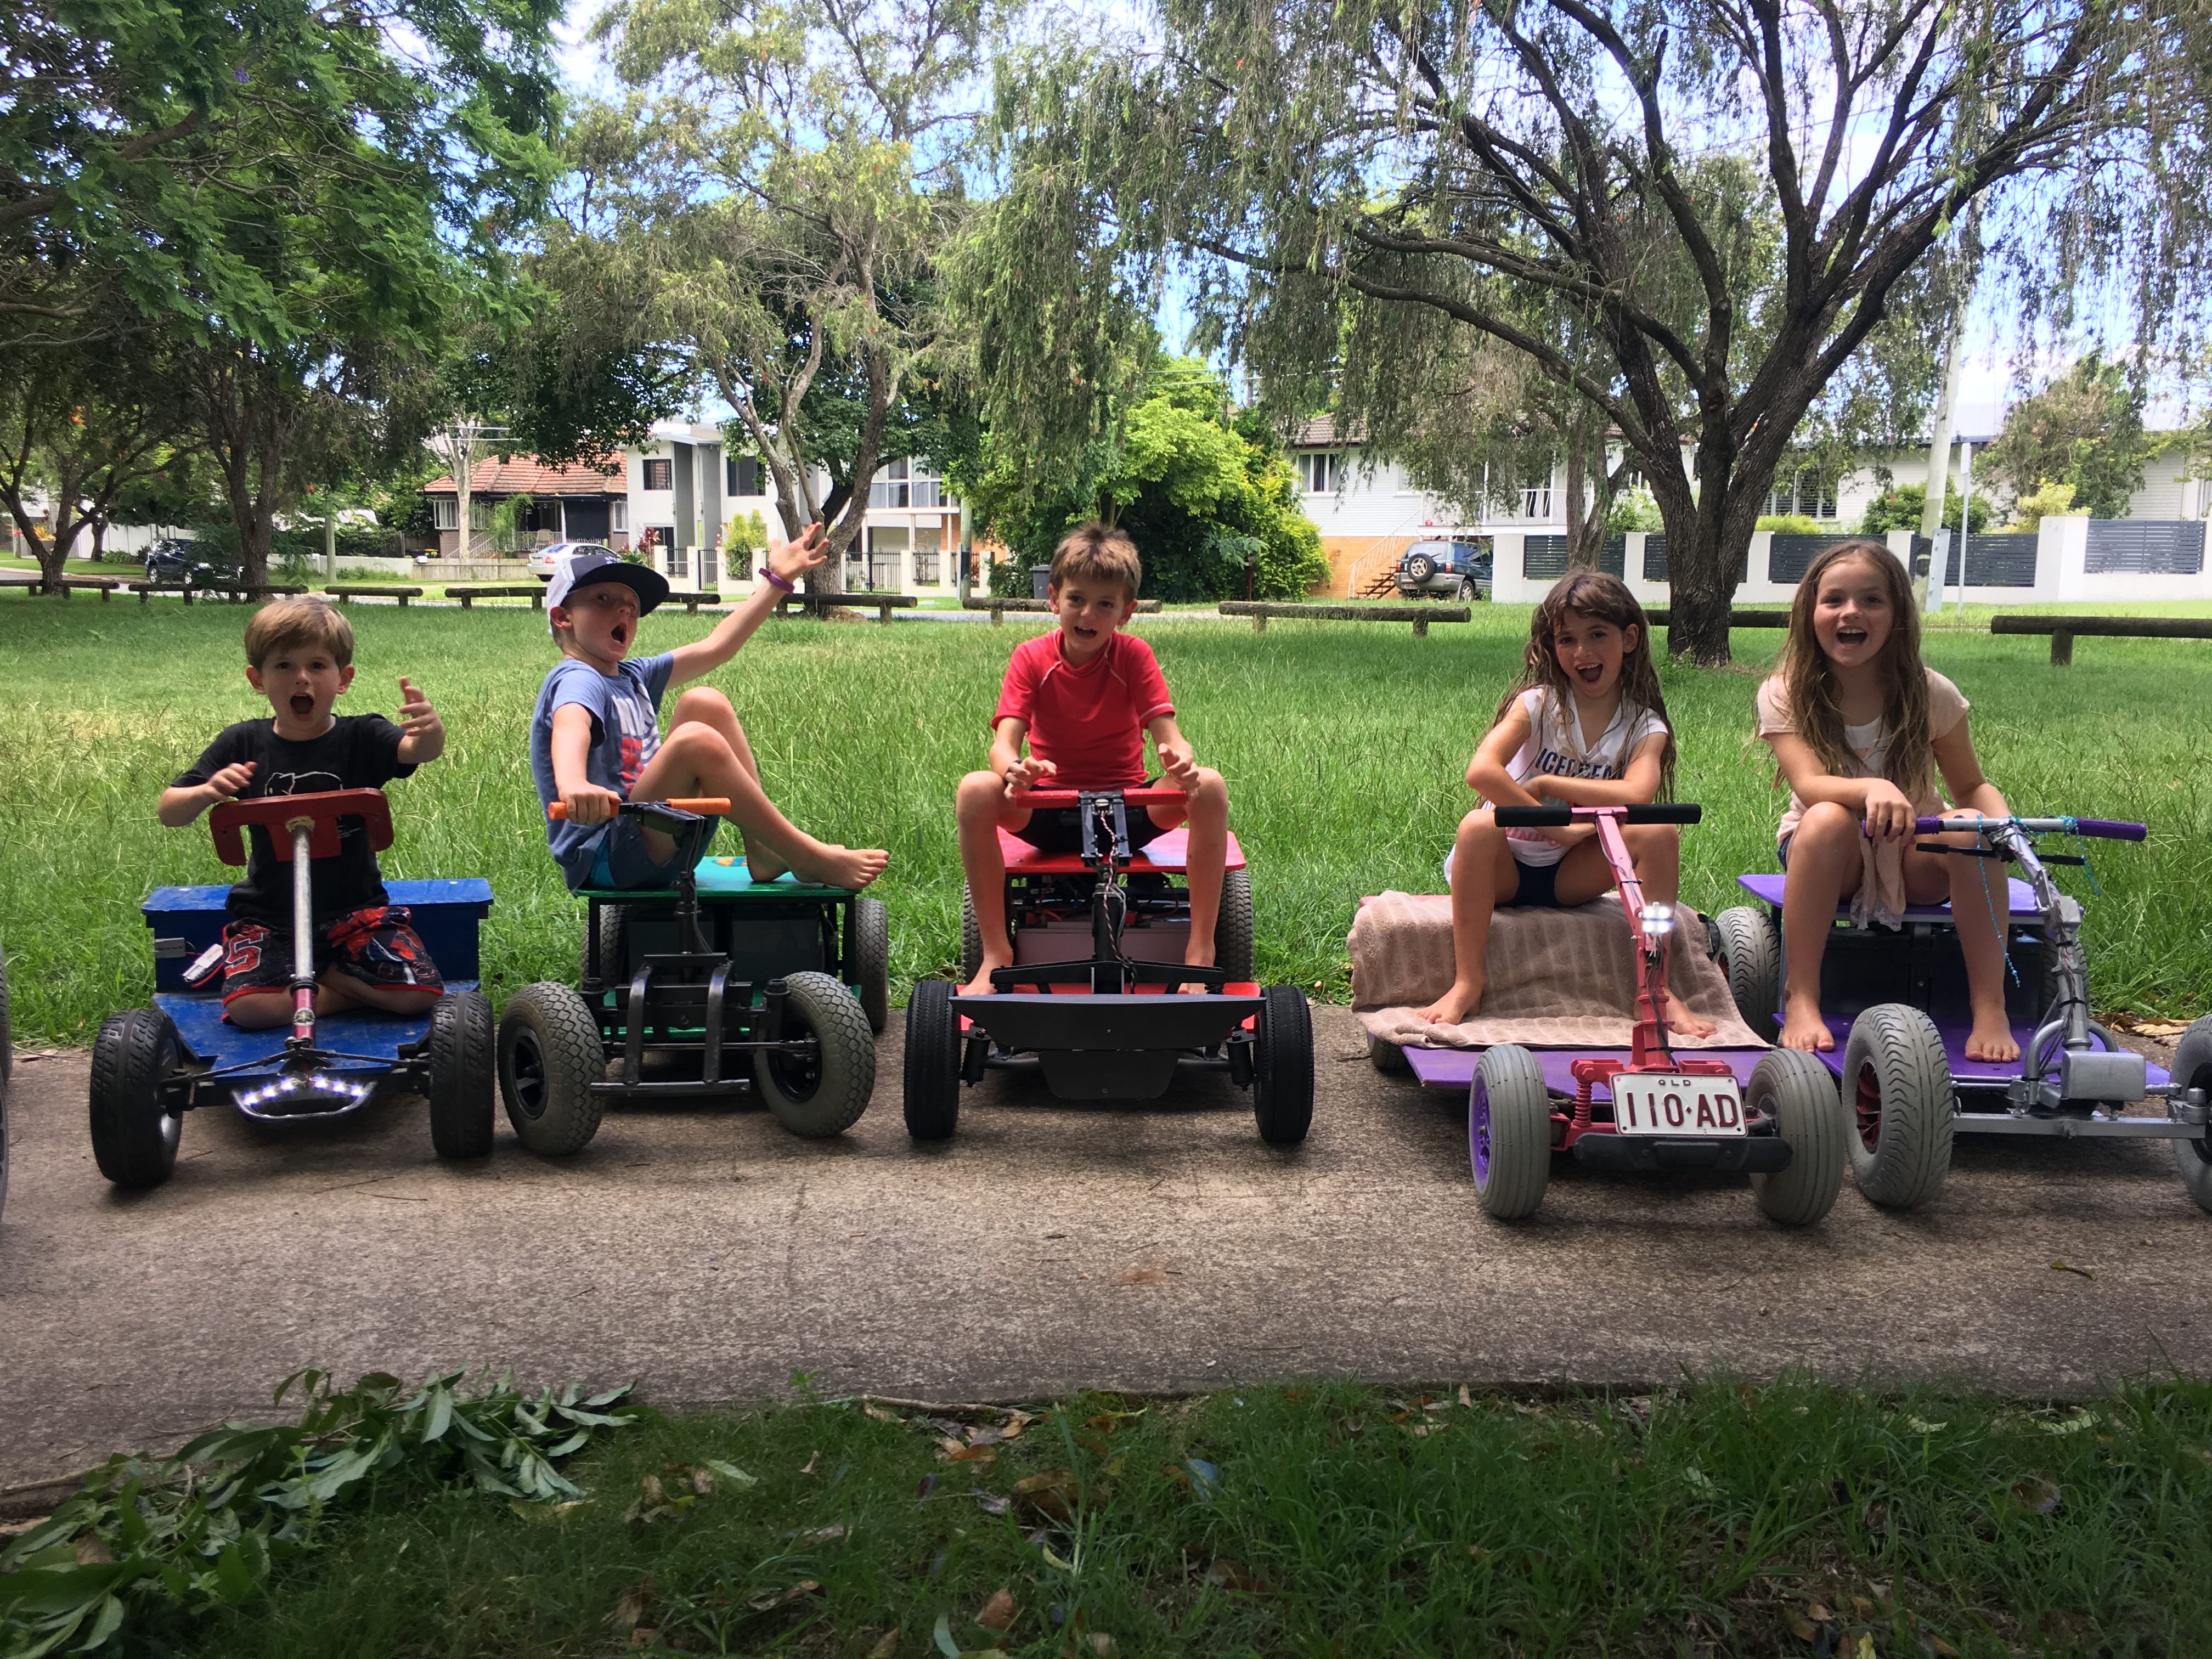 Five children on their electric cars